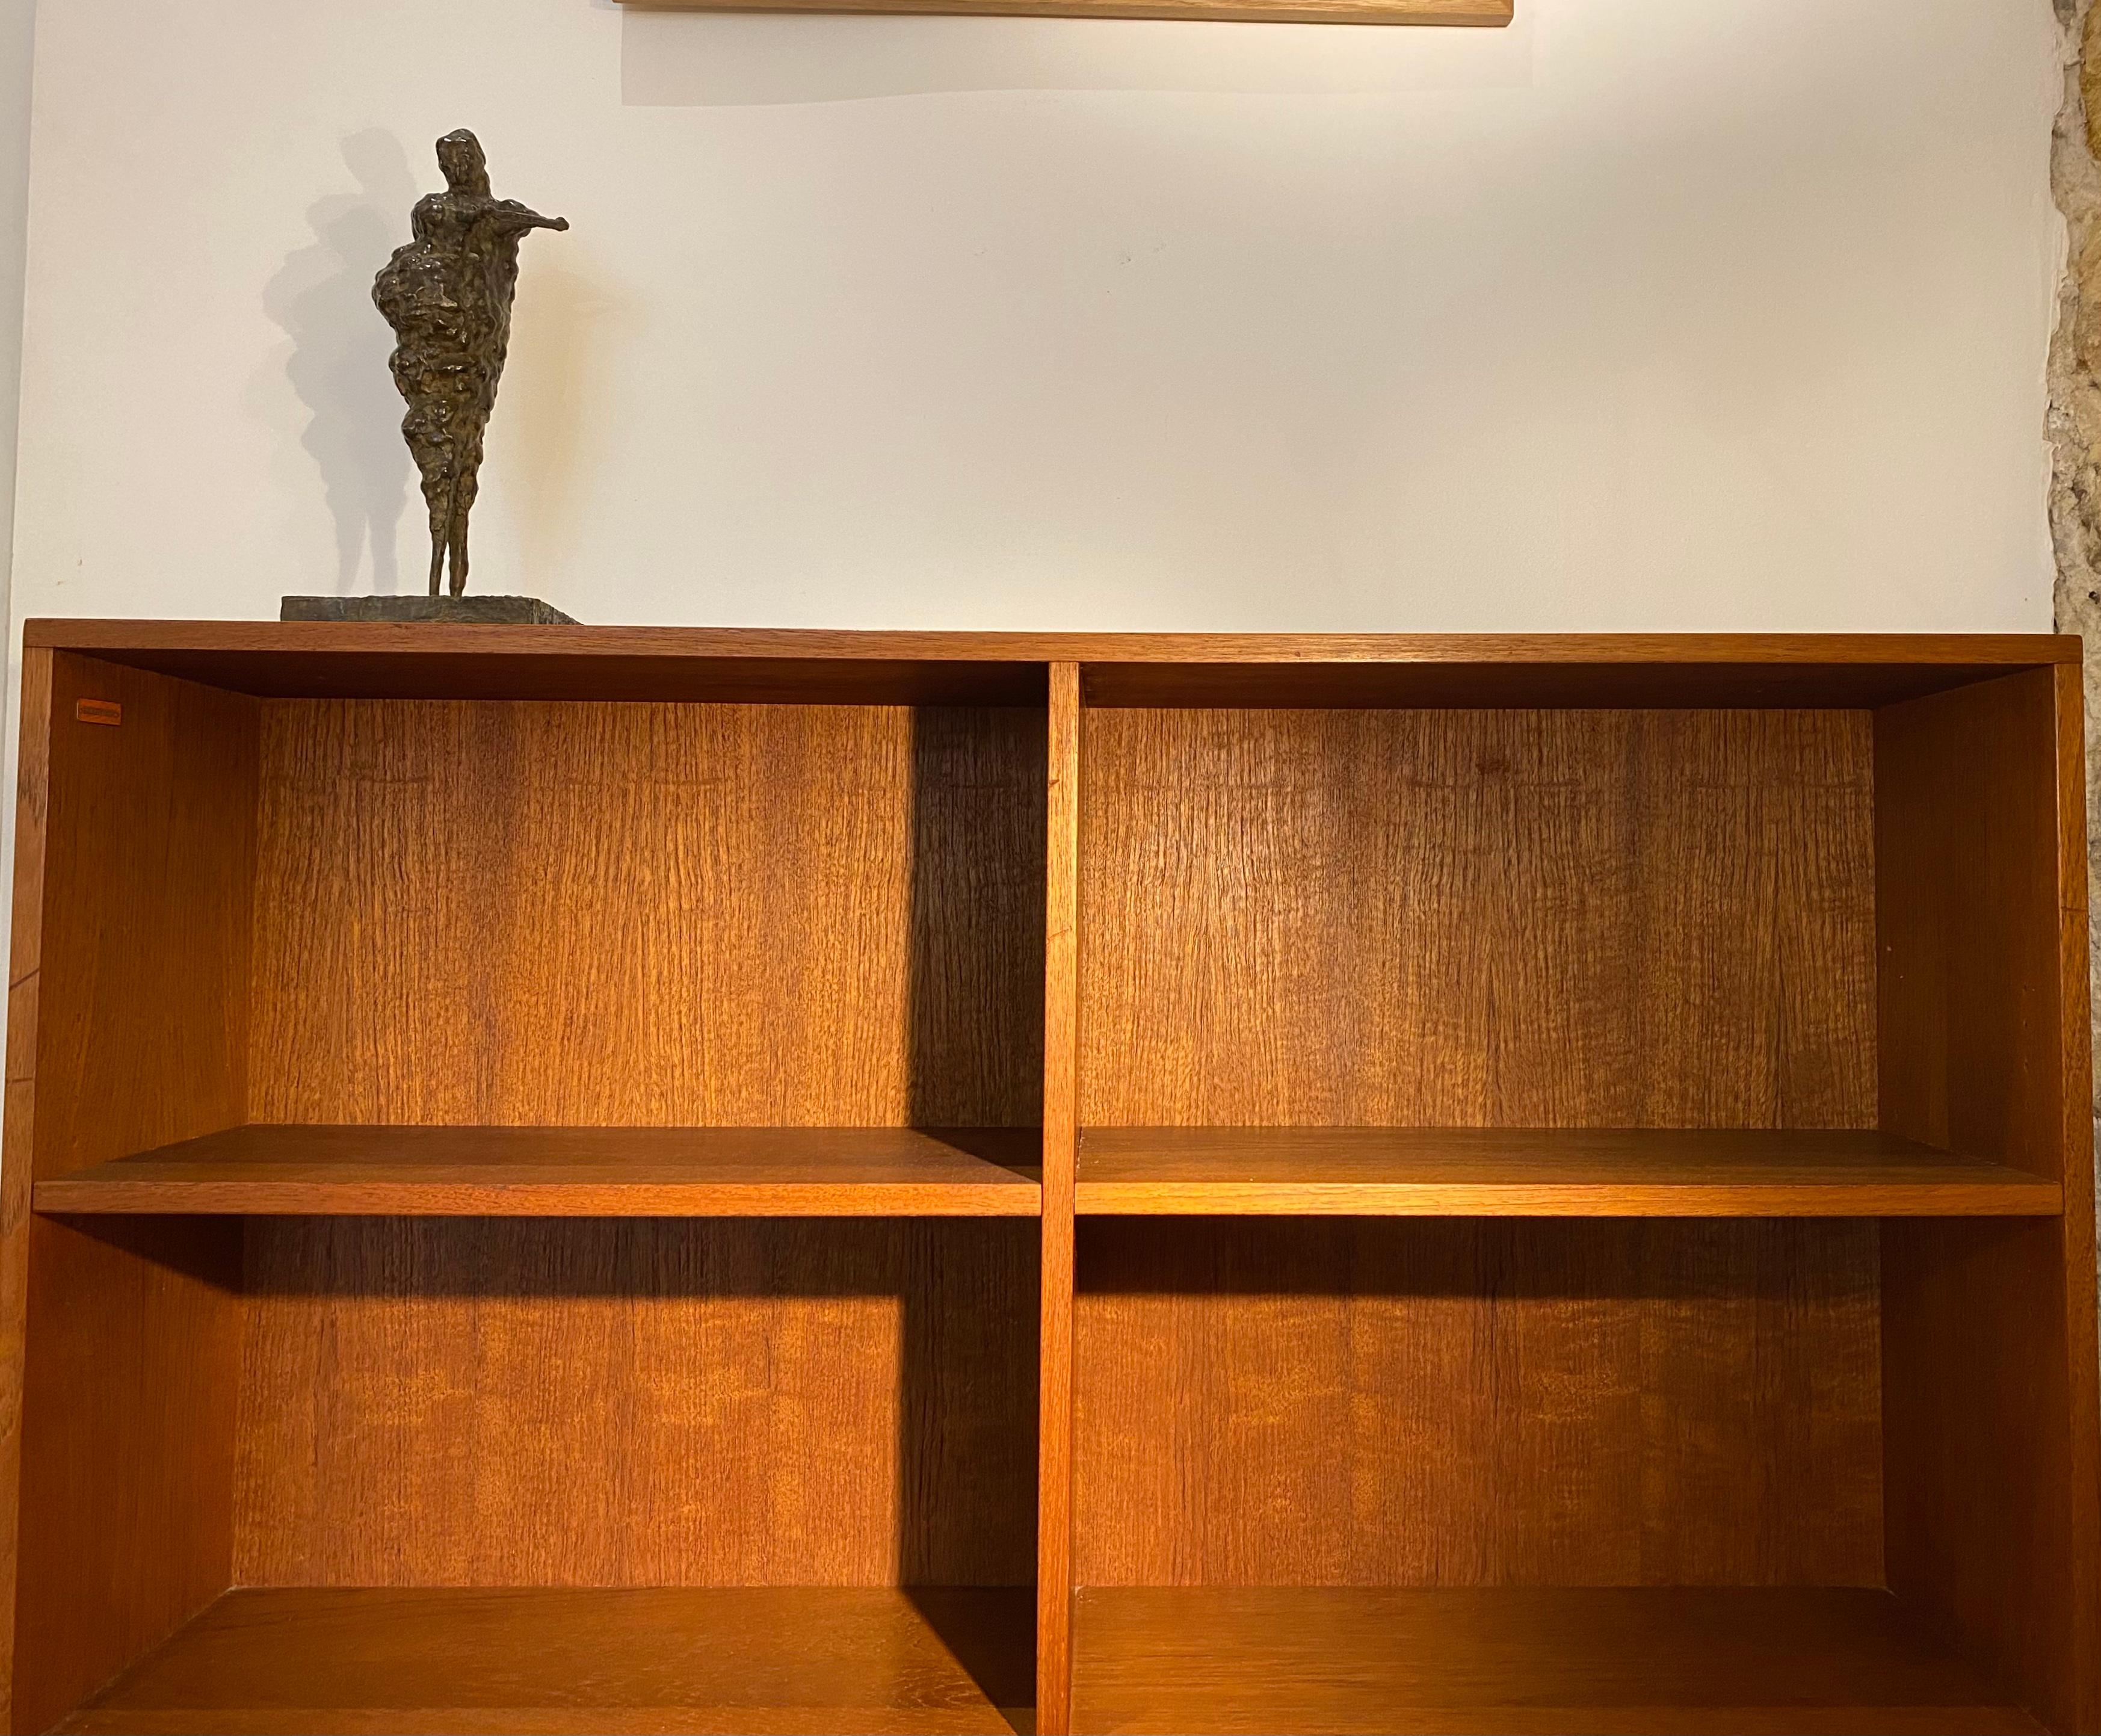 Brandstorps bookcase in teak. This bookcase was produced in the 60's by the Swedish factory Branstorp. This bookcase has a very natural look as it is entirely made of teak wood. It is also very functional and beautiful. The details of the alloyed